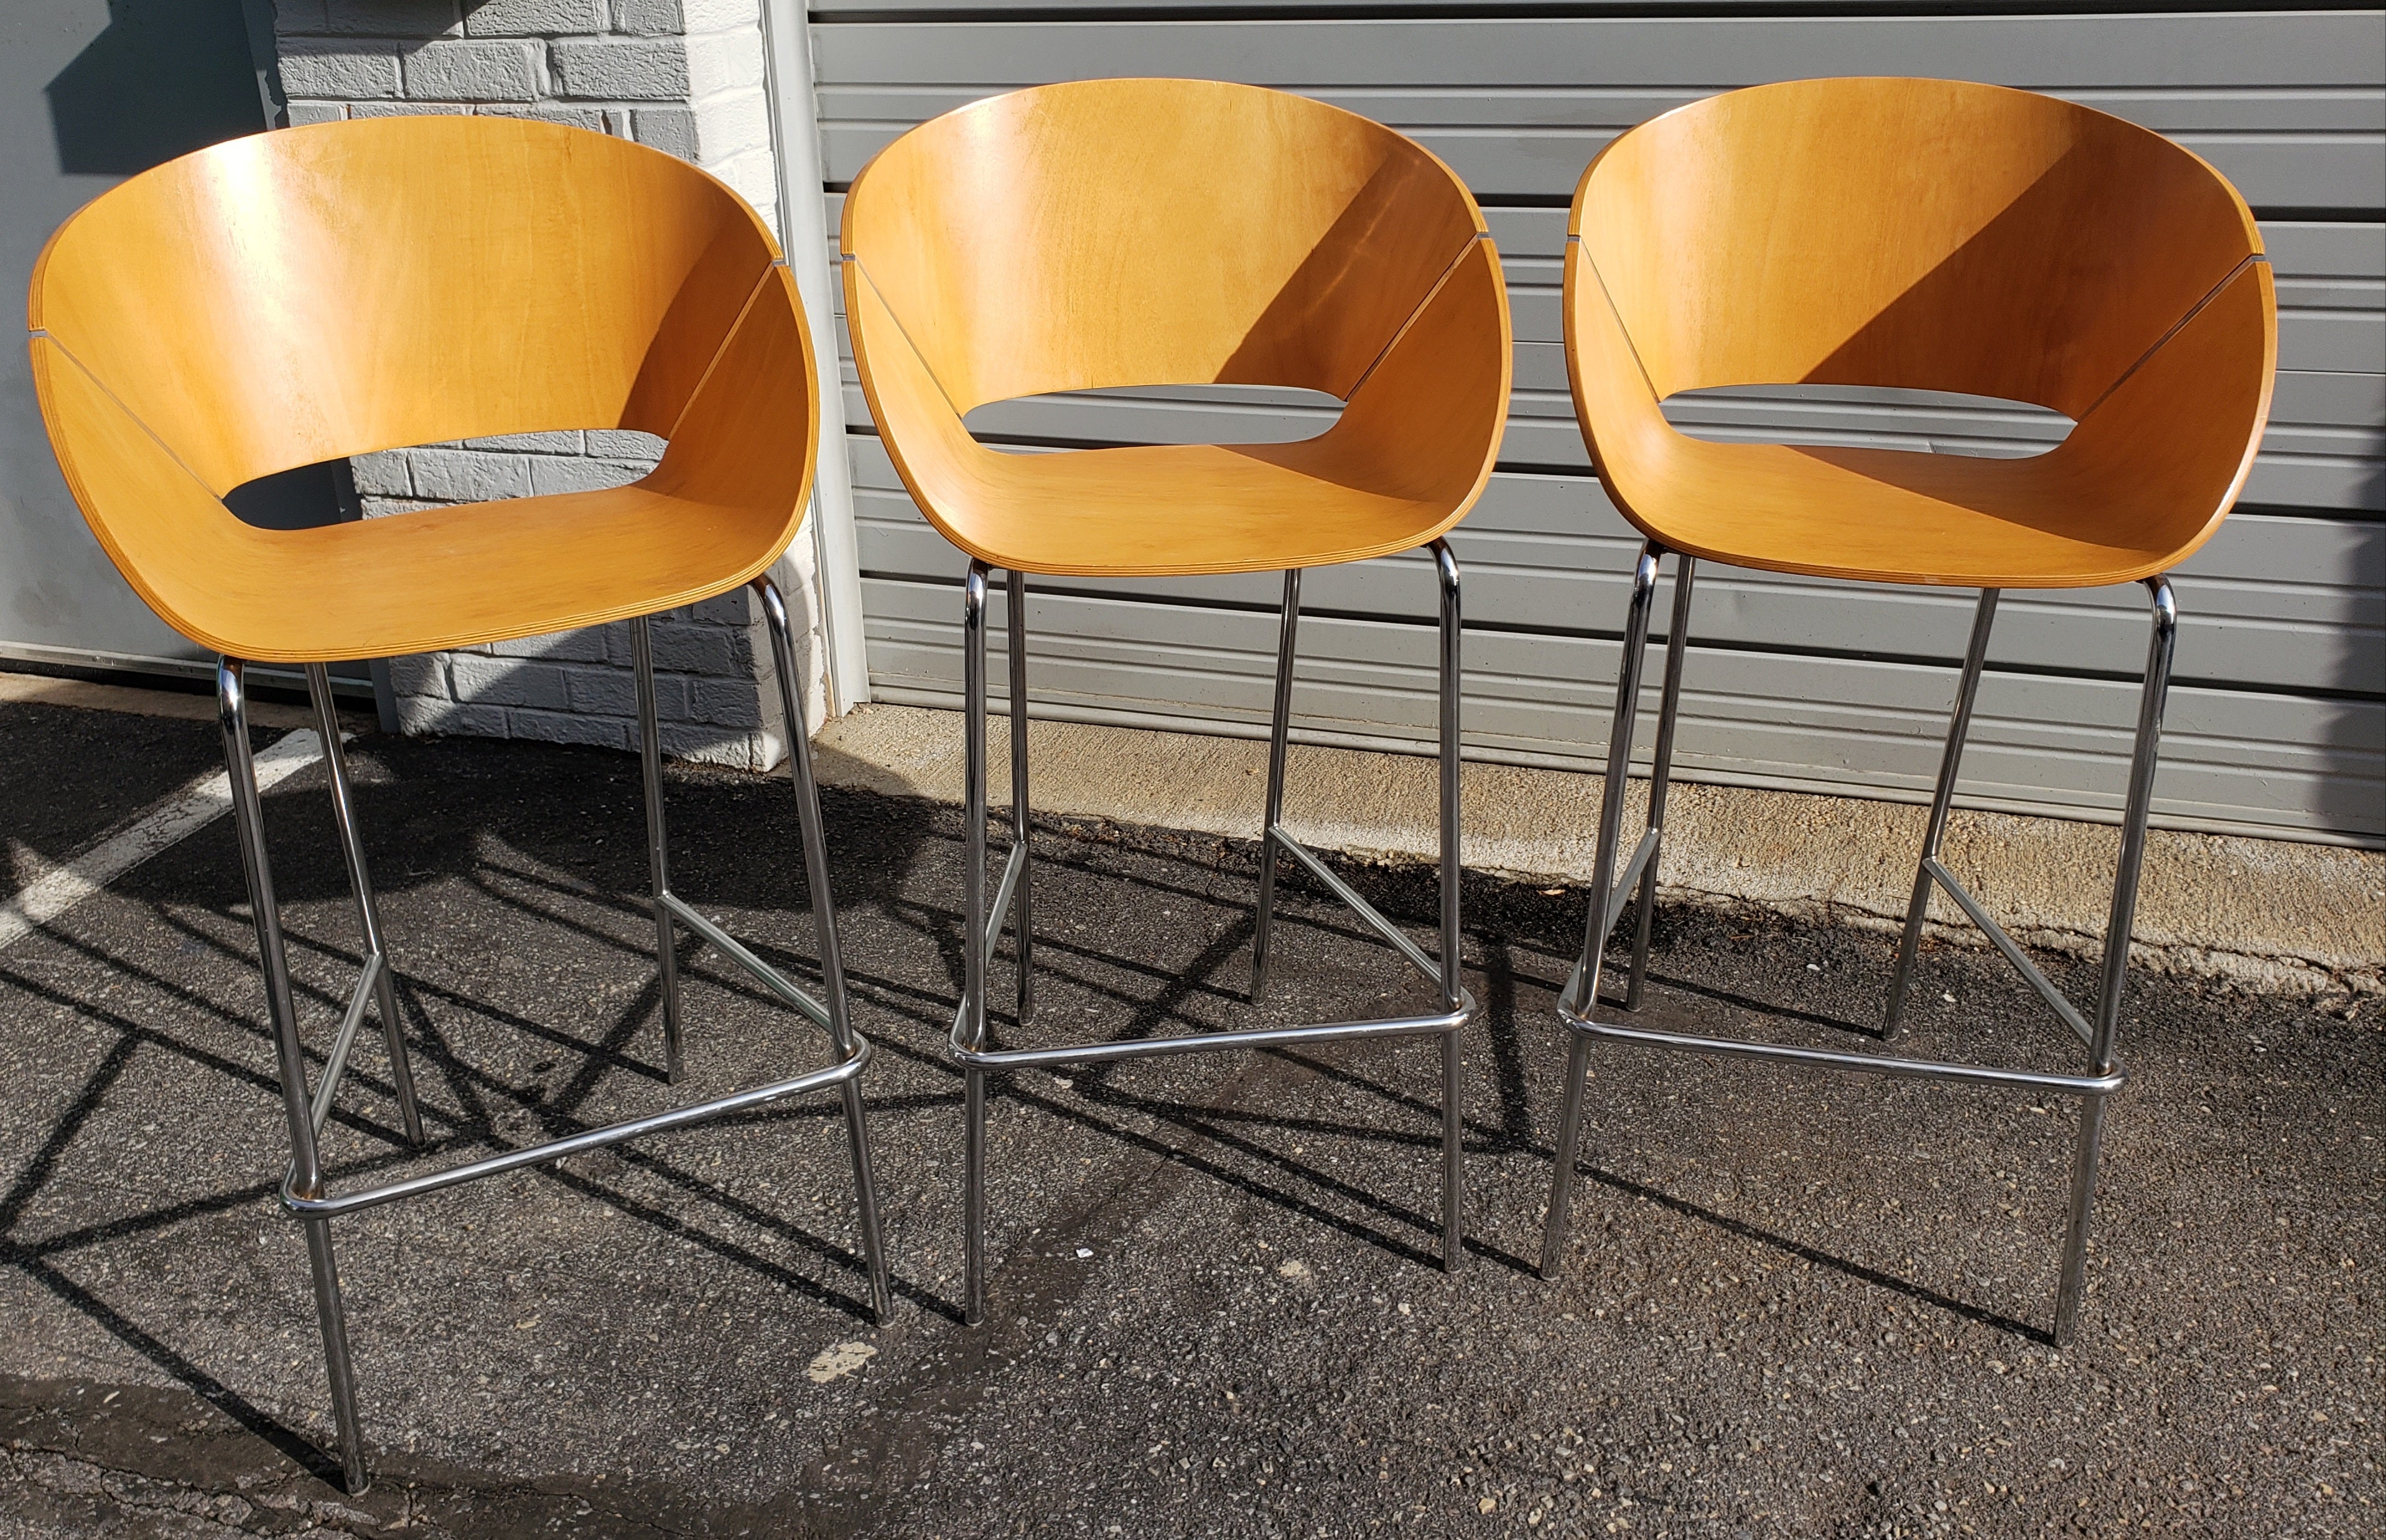 Wolfgang C R Mezger for Davis Furniture Scandinavian modern barstools, Circqa 1970s. Priced per item.
Good vintage condition. Some wear appropriate with age and use. Very few scratches and marks, just gorgeous barstools. 
W3 lower rear left.